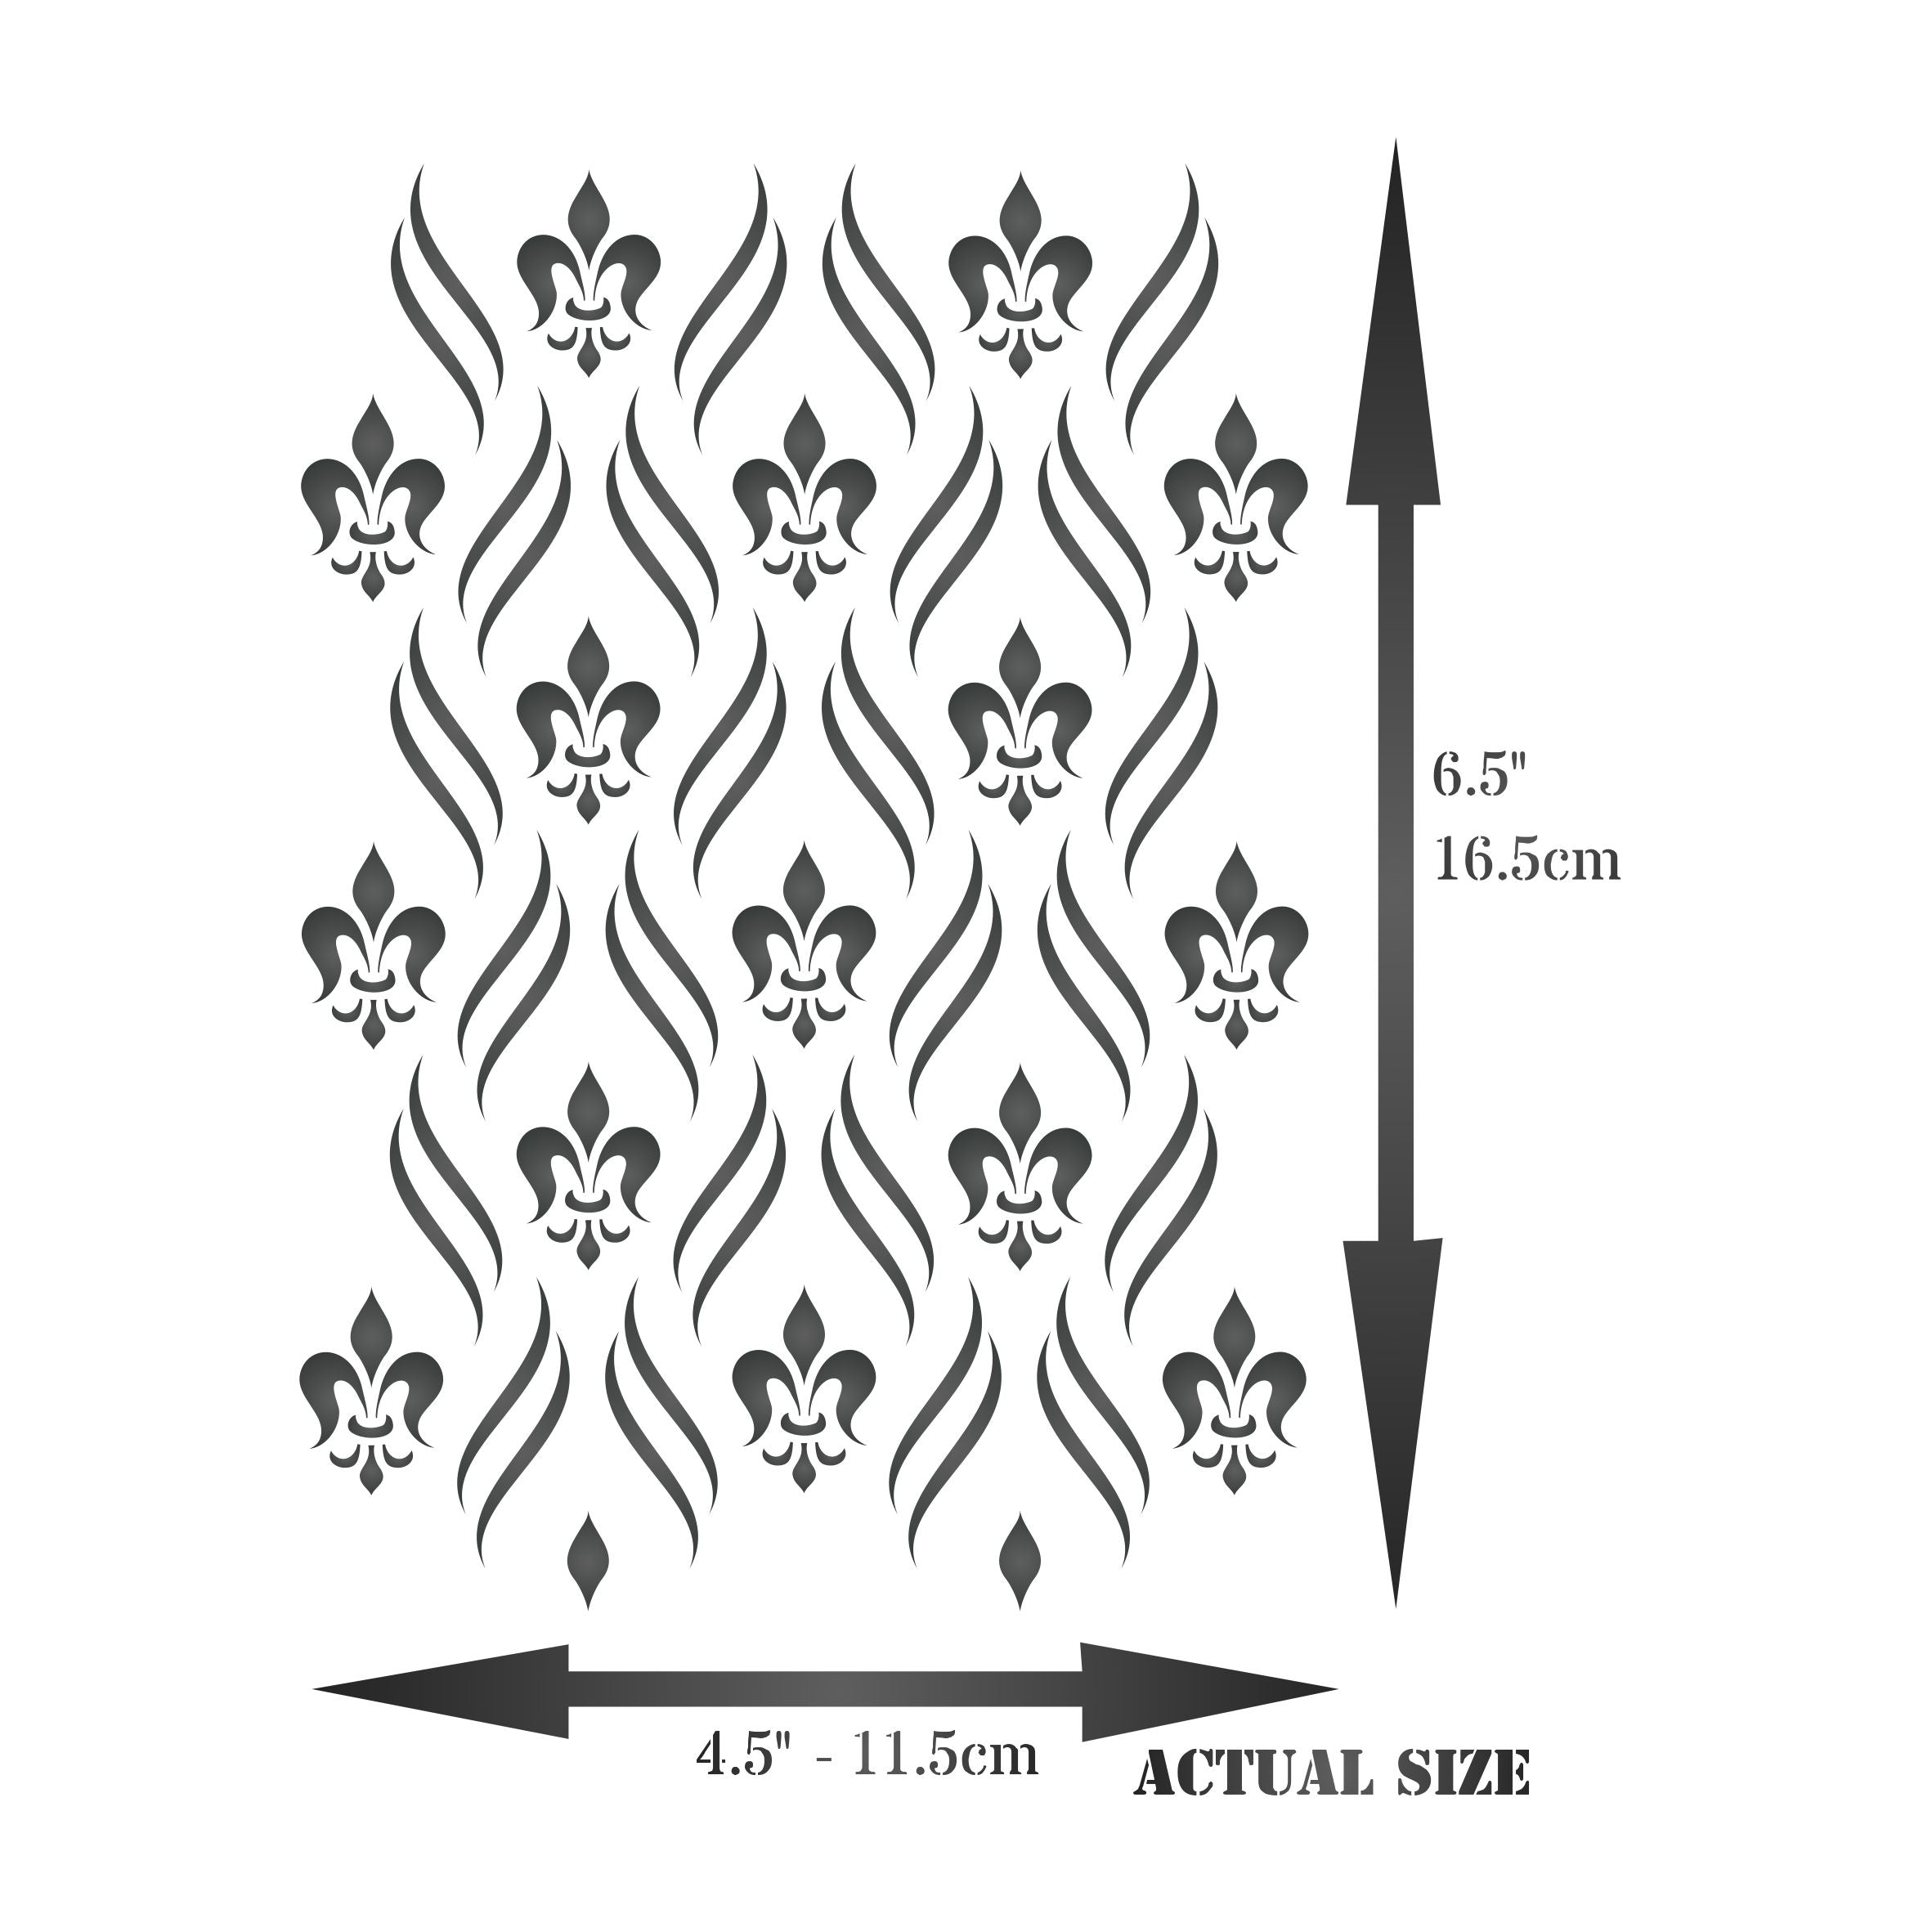 Fleur de Lis Layering Stencil- Layering use to add Texture and Design